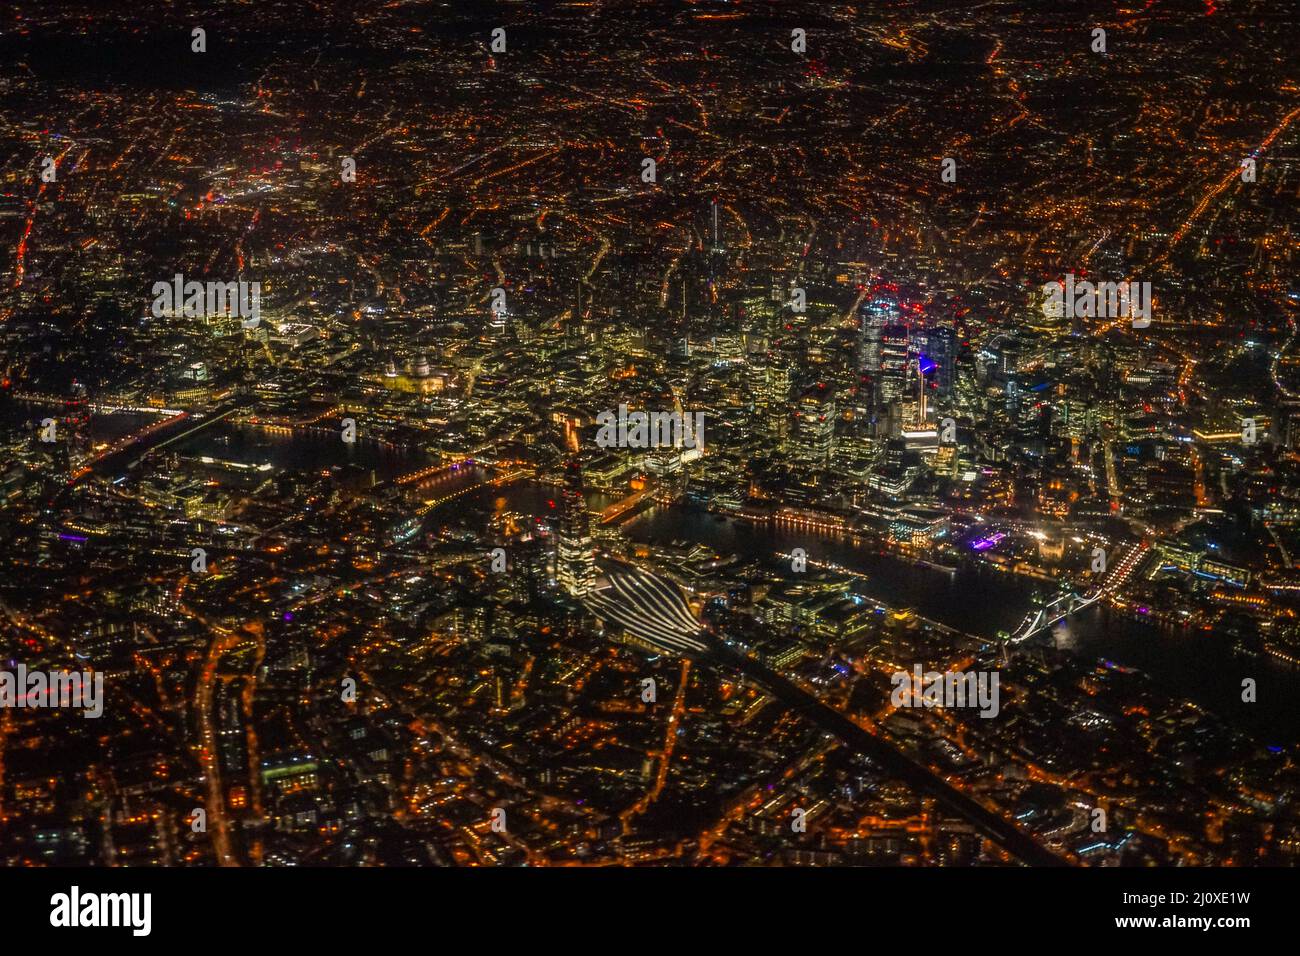 London night view as seen from an airplane Stock Photo